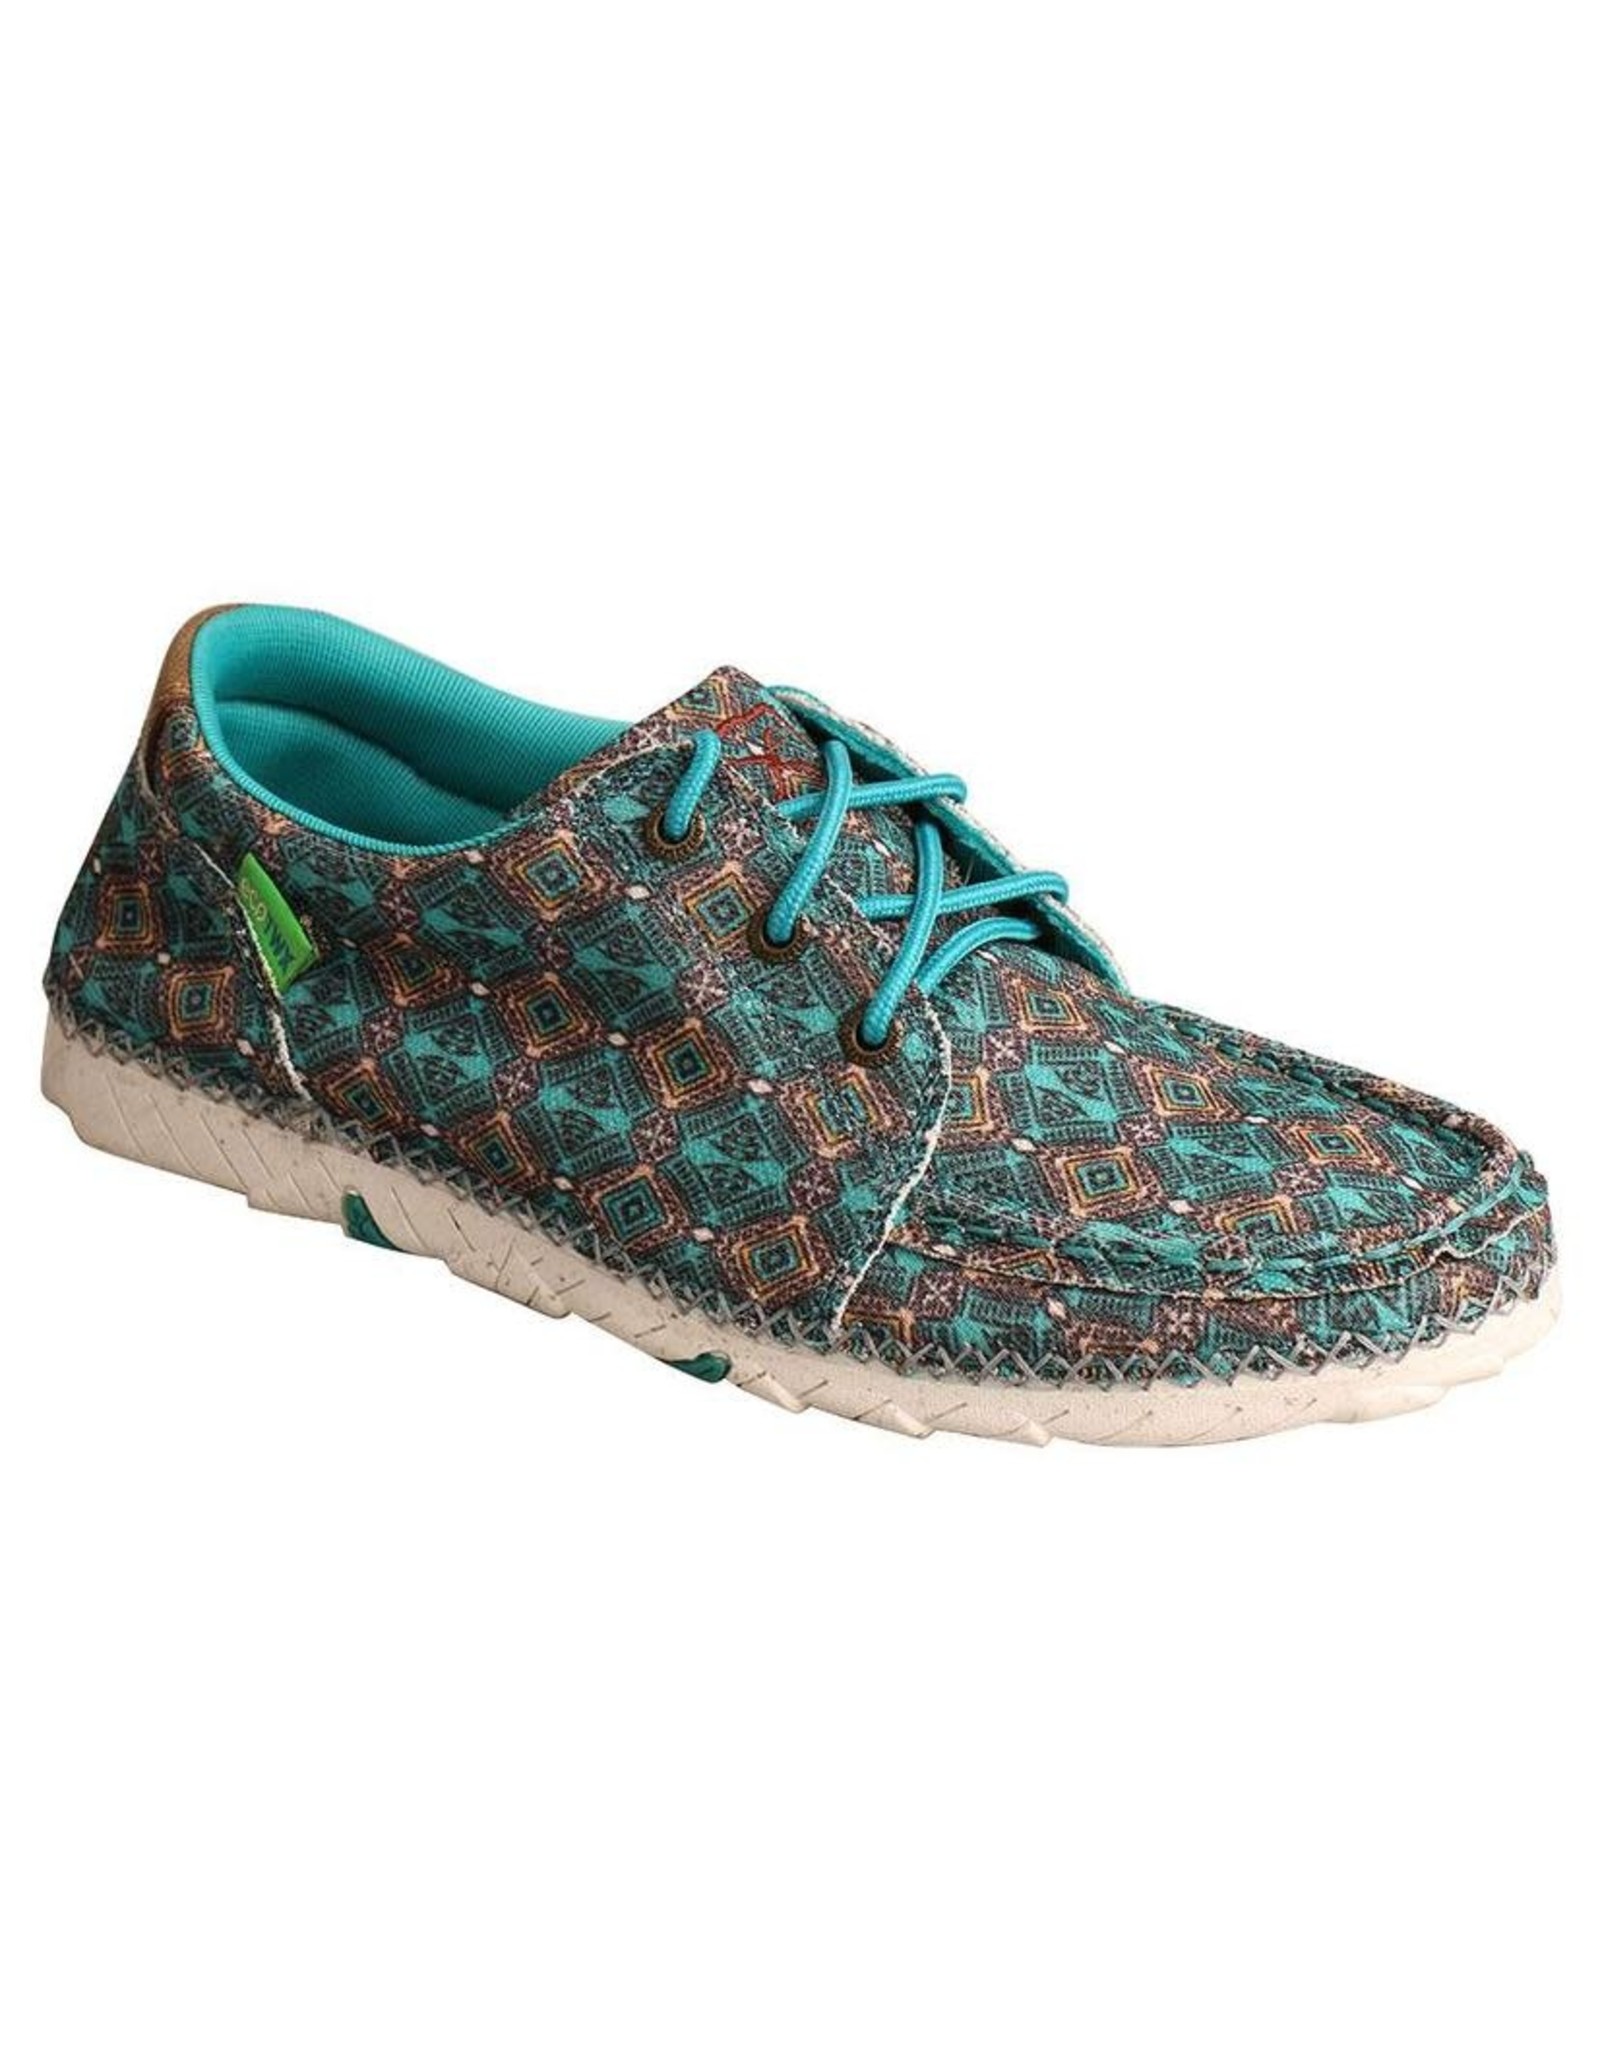 Twisted X Women's Eco Zero X Turquoise Aztec WZX0002 Shoes no reorder